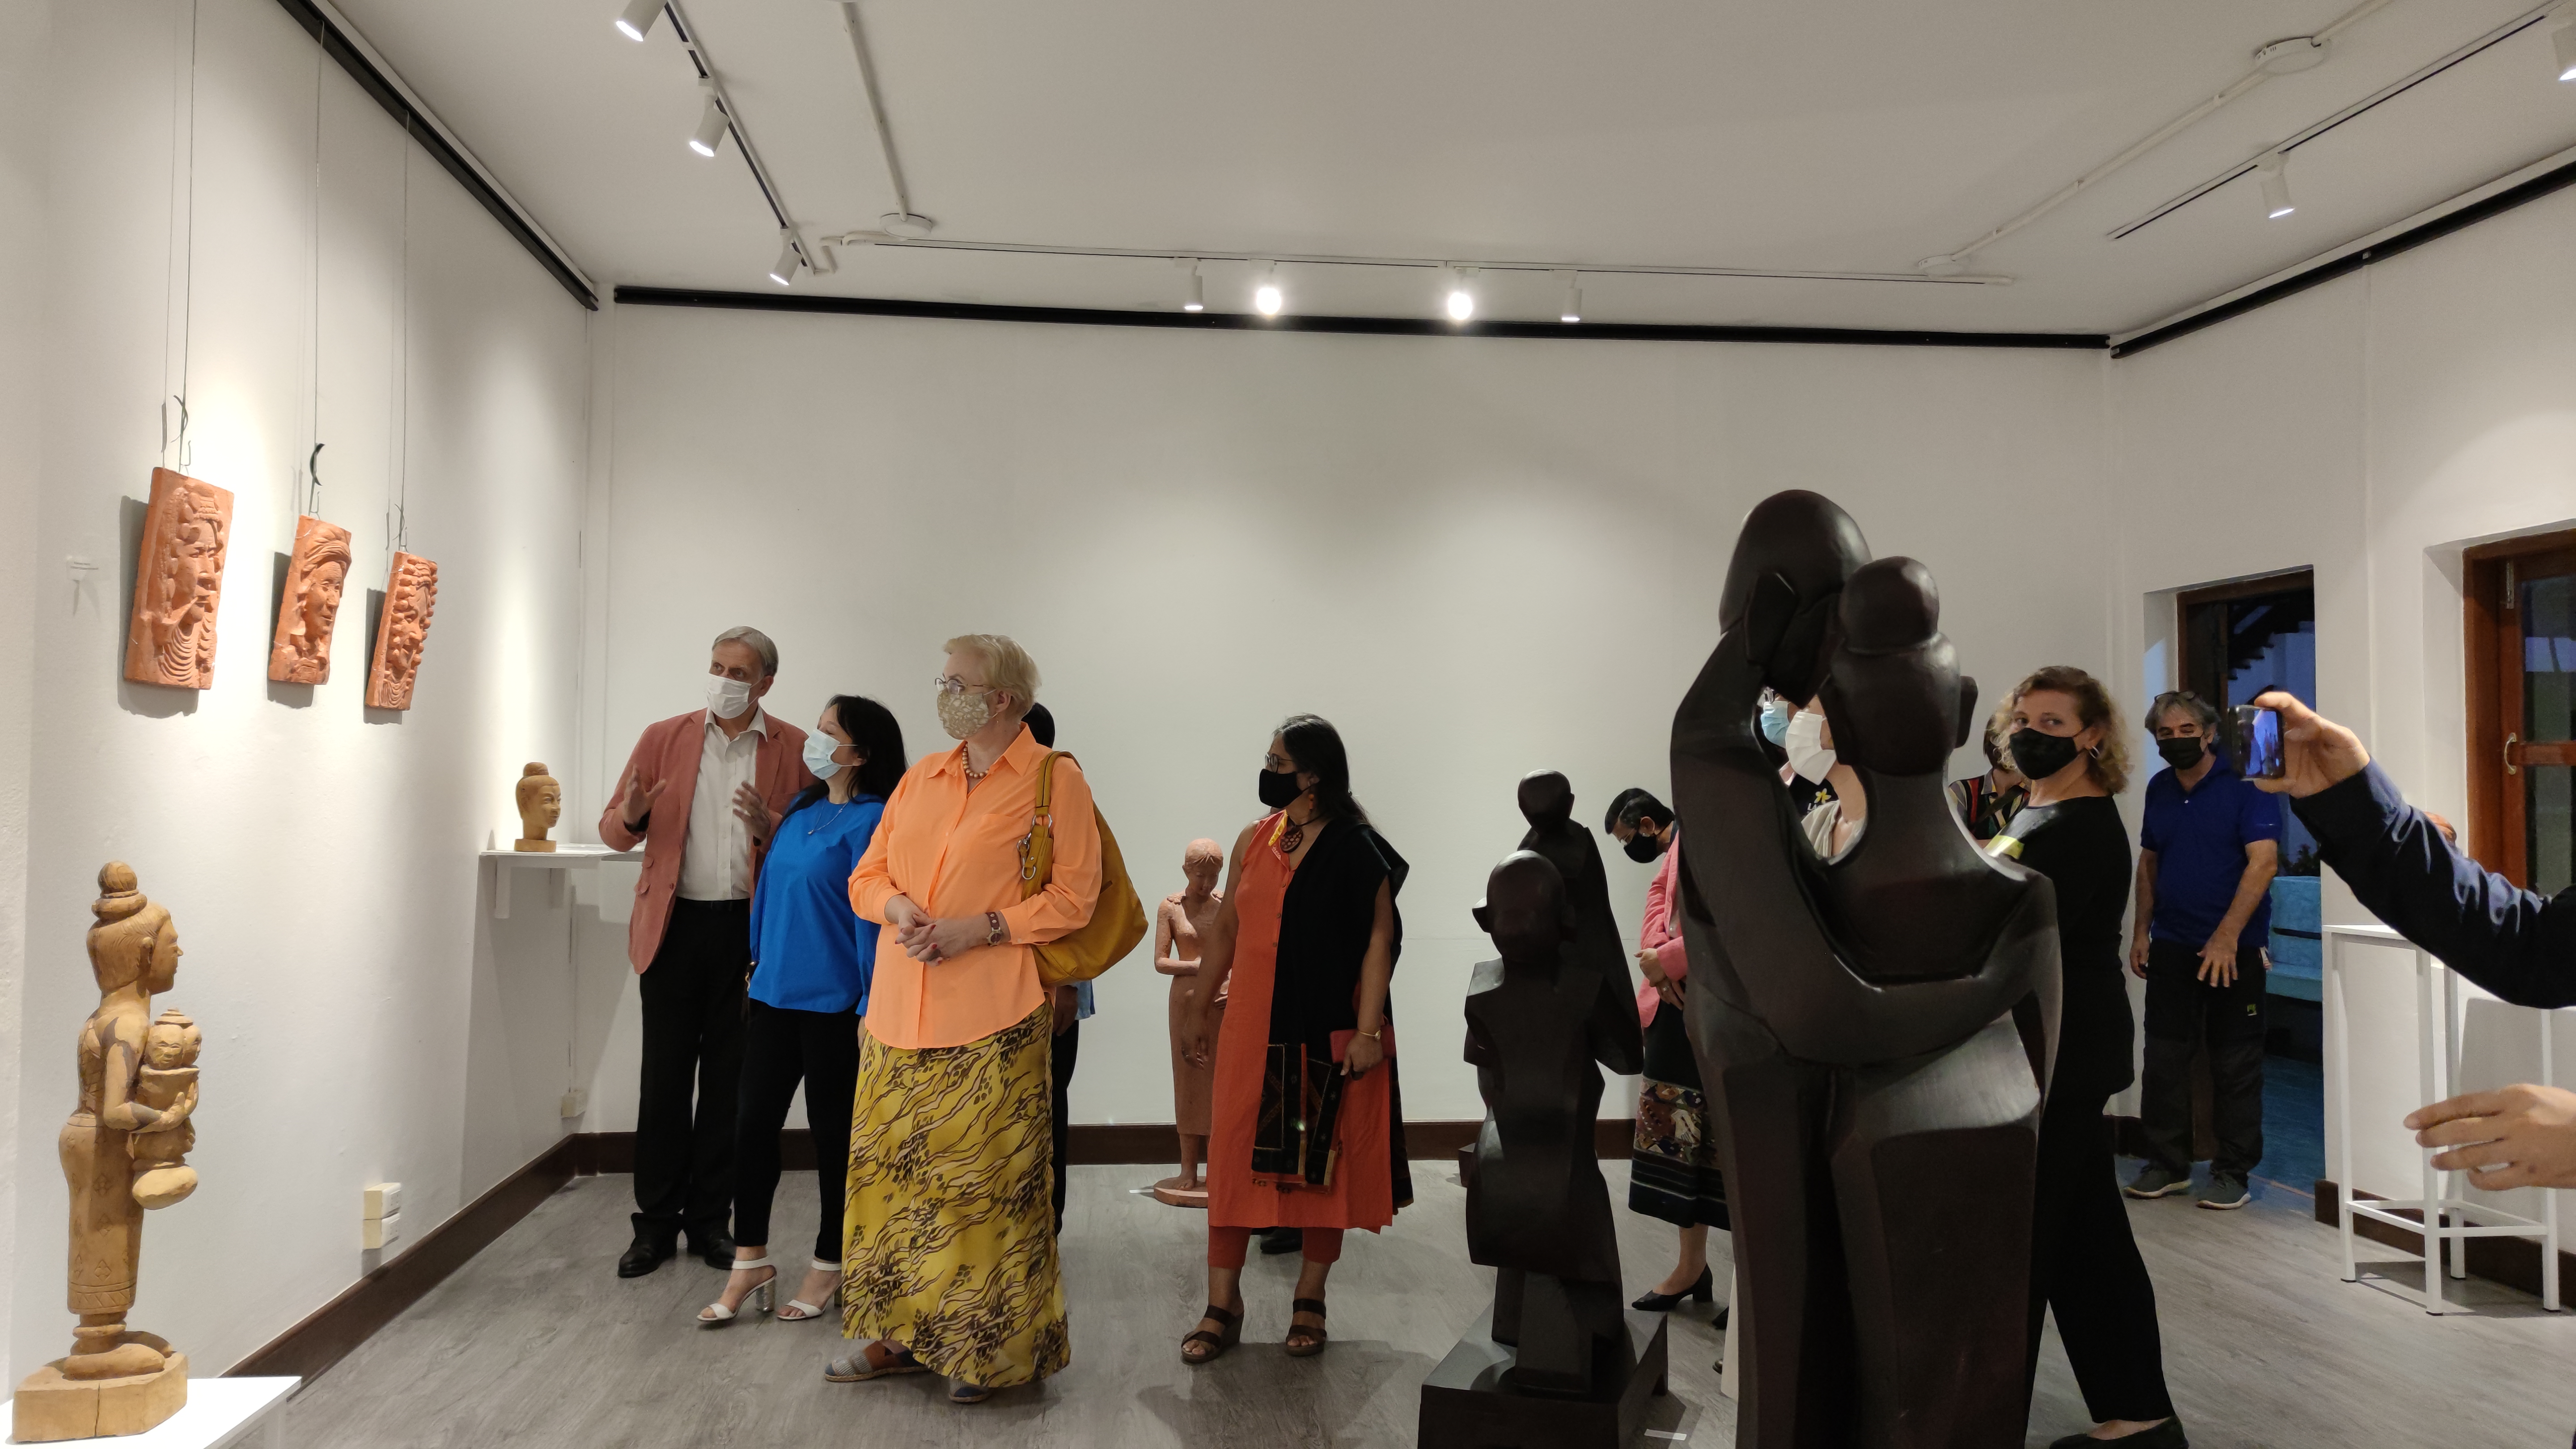 A splendid exhibition of SCULPTURES by Lao artists at the French Institute